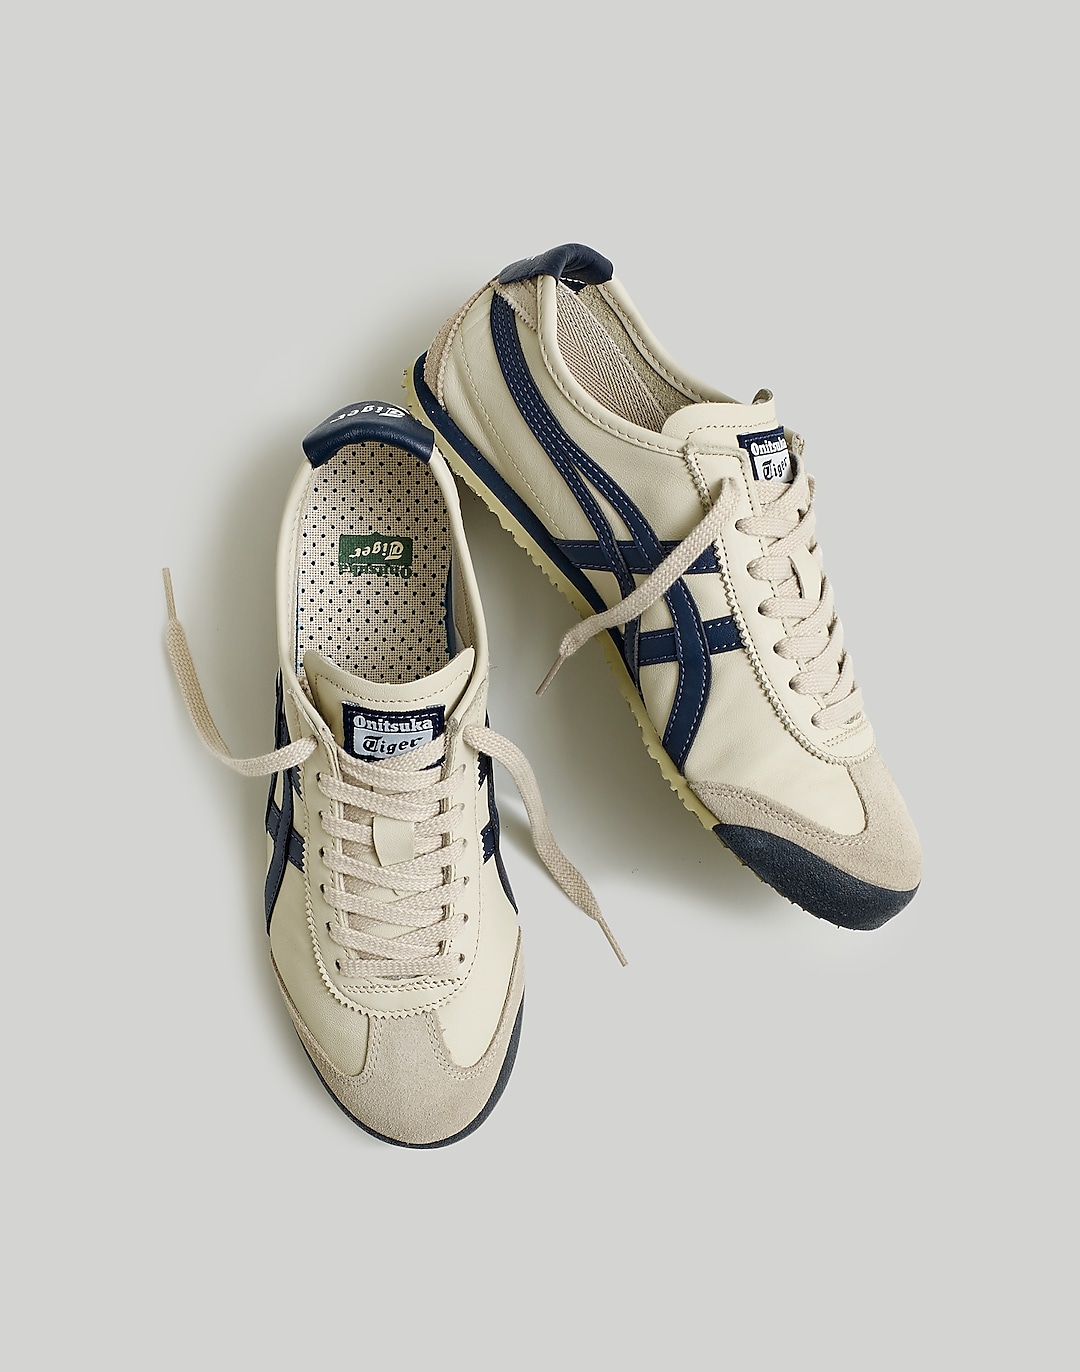 Onitsuka Tiger™ Mexico 66 Sneakers | Madewell